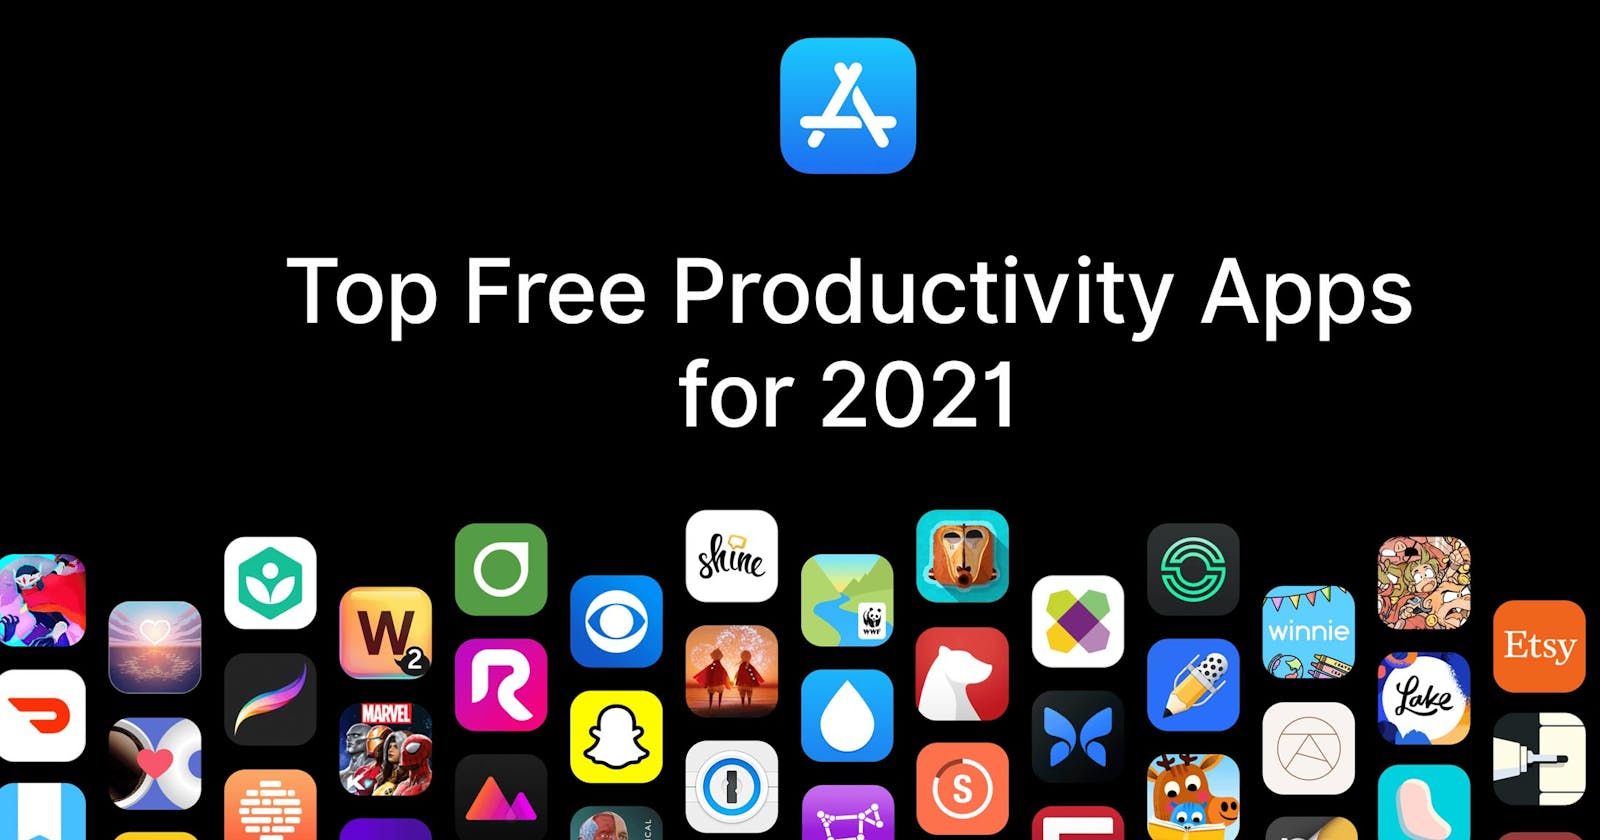 Top Free Productivity Apps for 2021